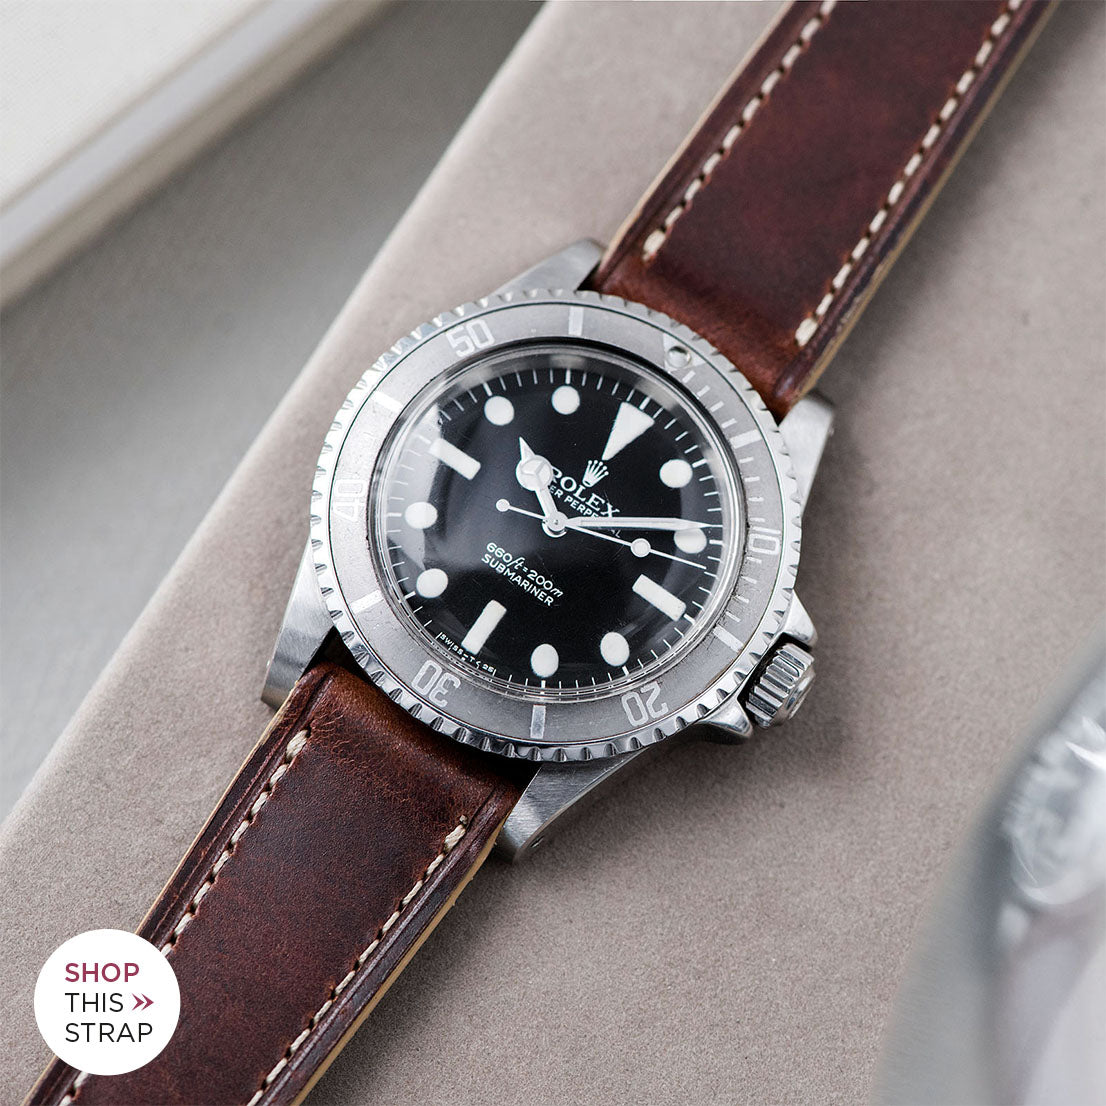 Bulang and Sons_Strap Guide_The Rolex 5513 Faded Maxi Submariner_Siena Brown Retro Leather Watch Strap